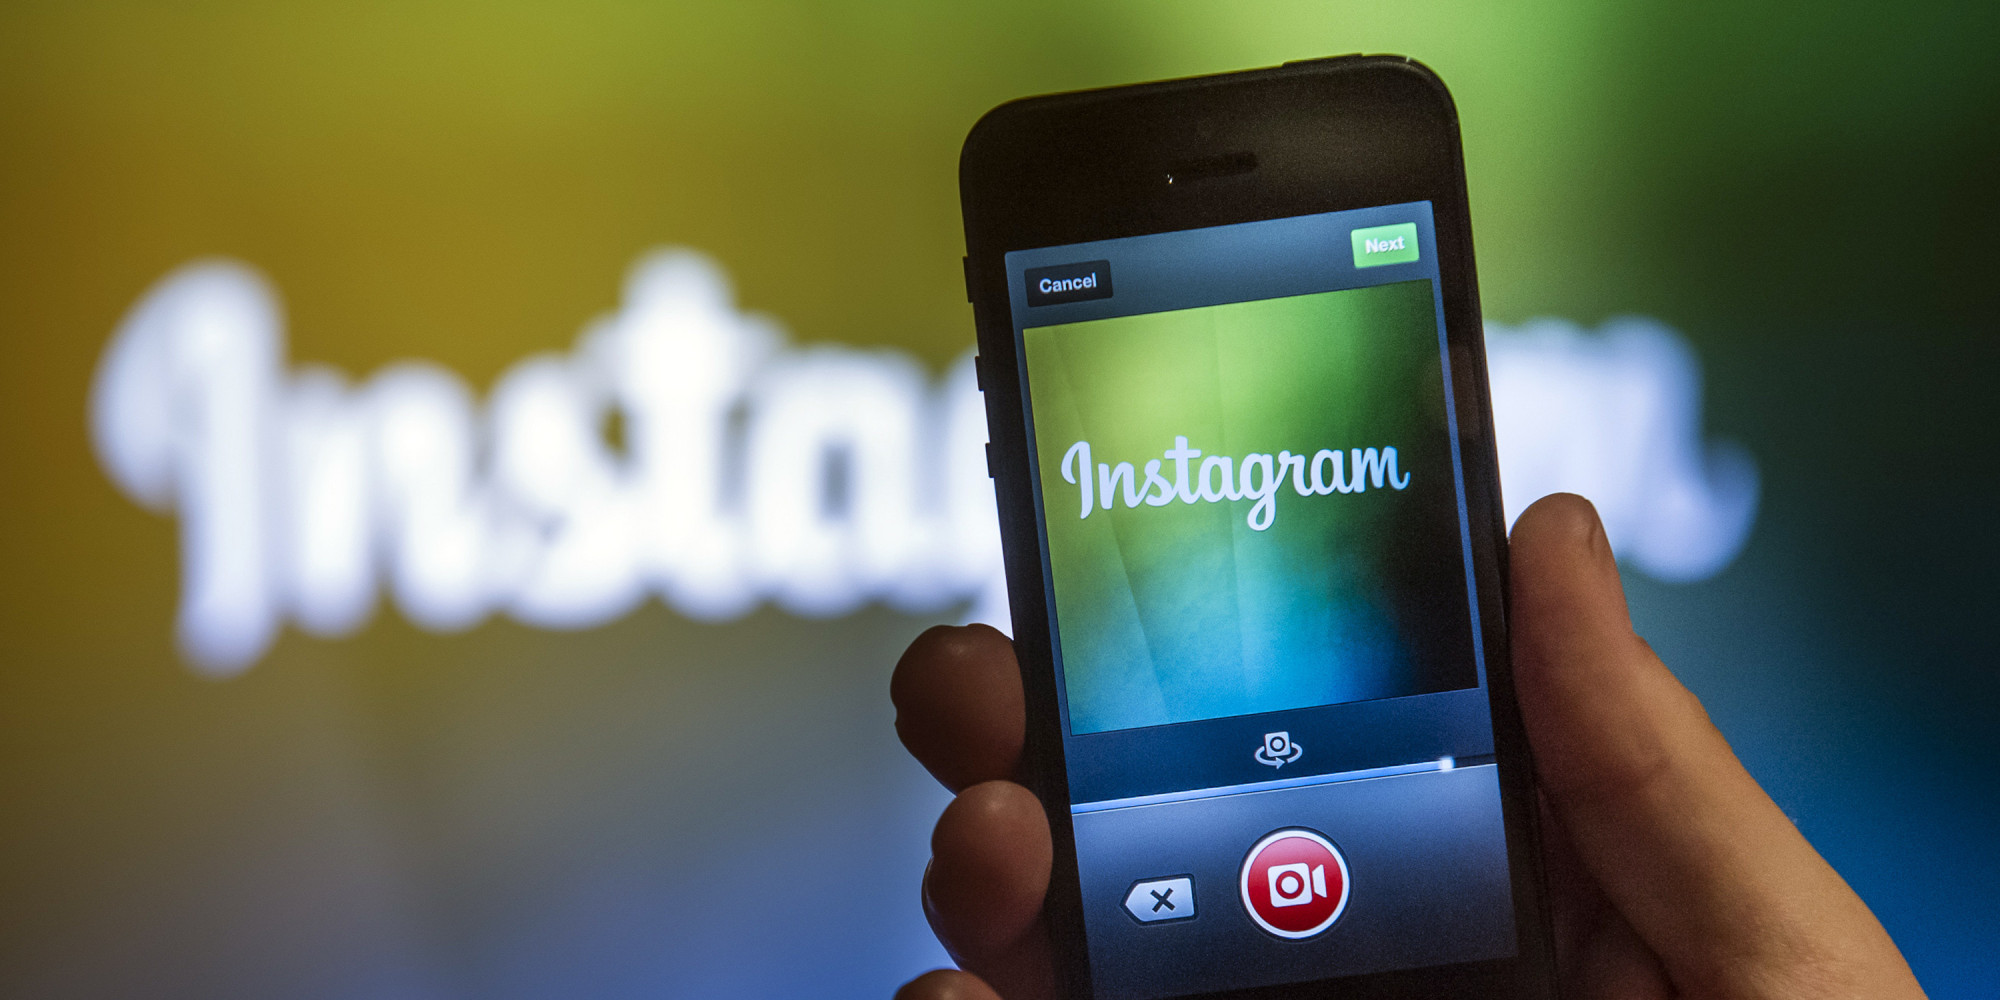 Instagram Testing Multiple Accounts On Android Devices